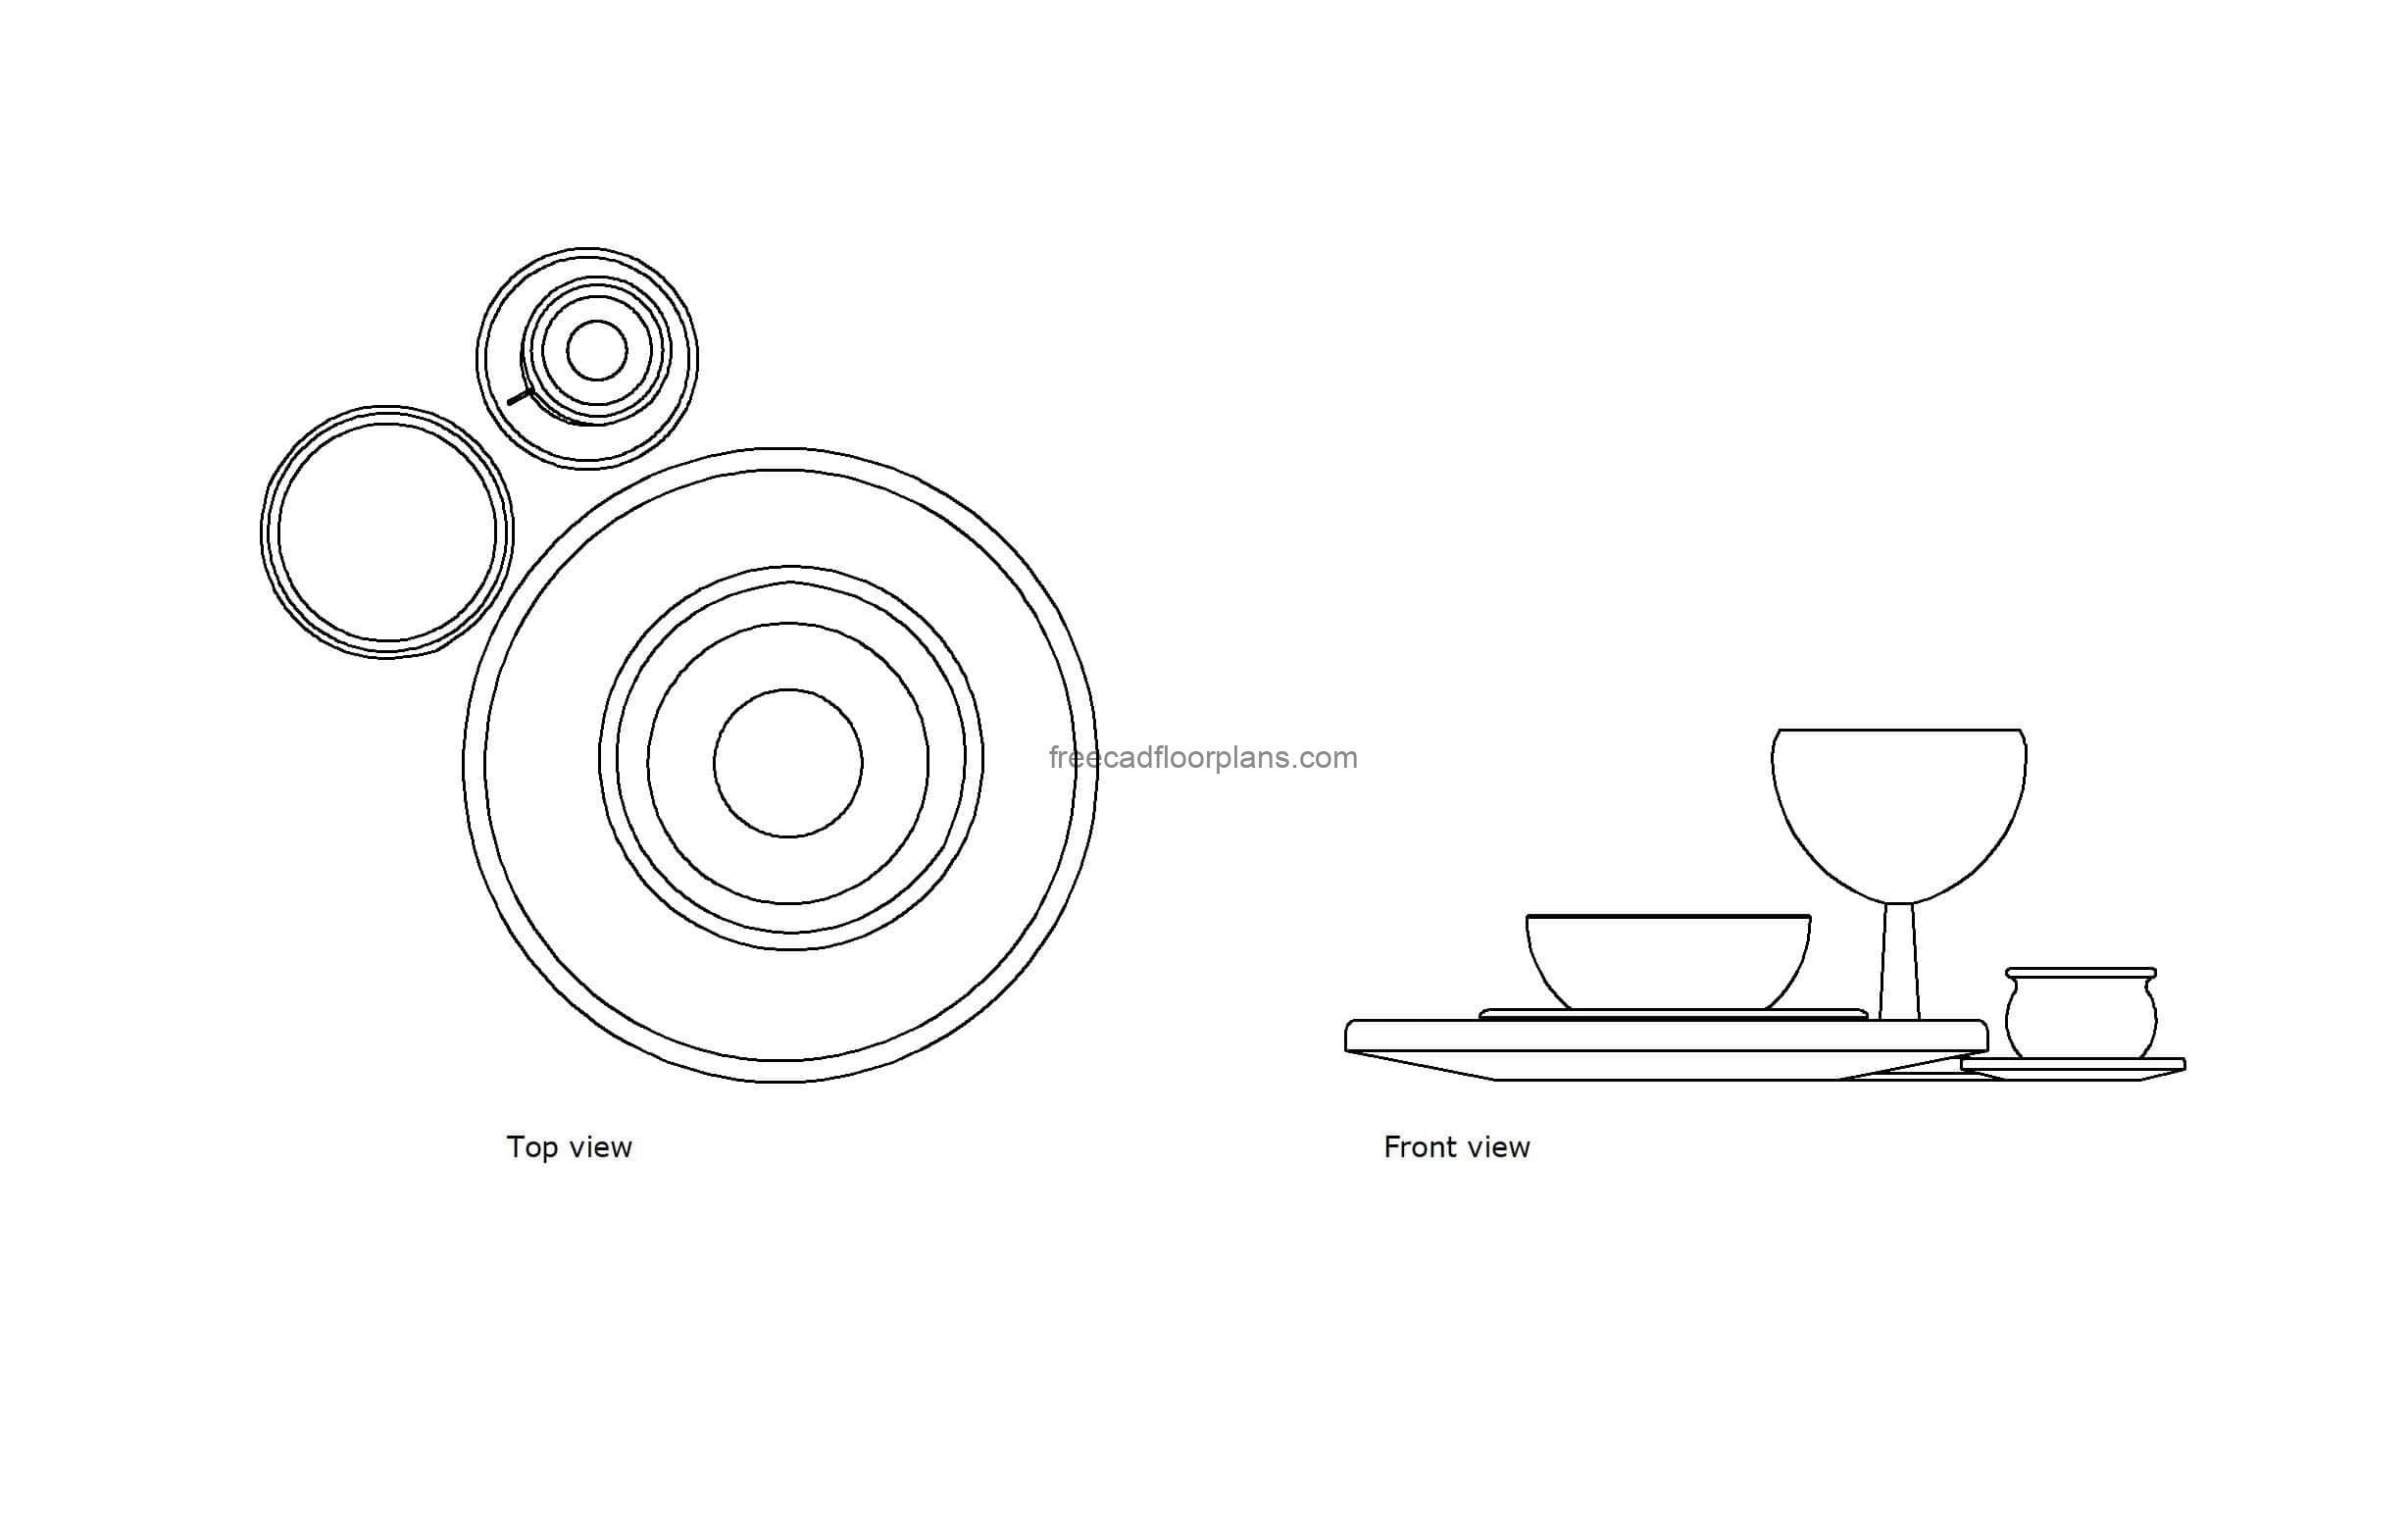 autocad drawing of a soup bowl, plan and elevation 2d views, dwg file free for download bowl, plan and ele